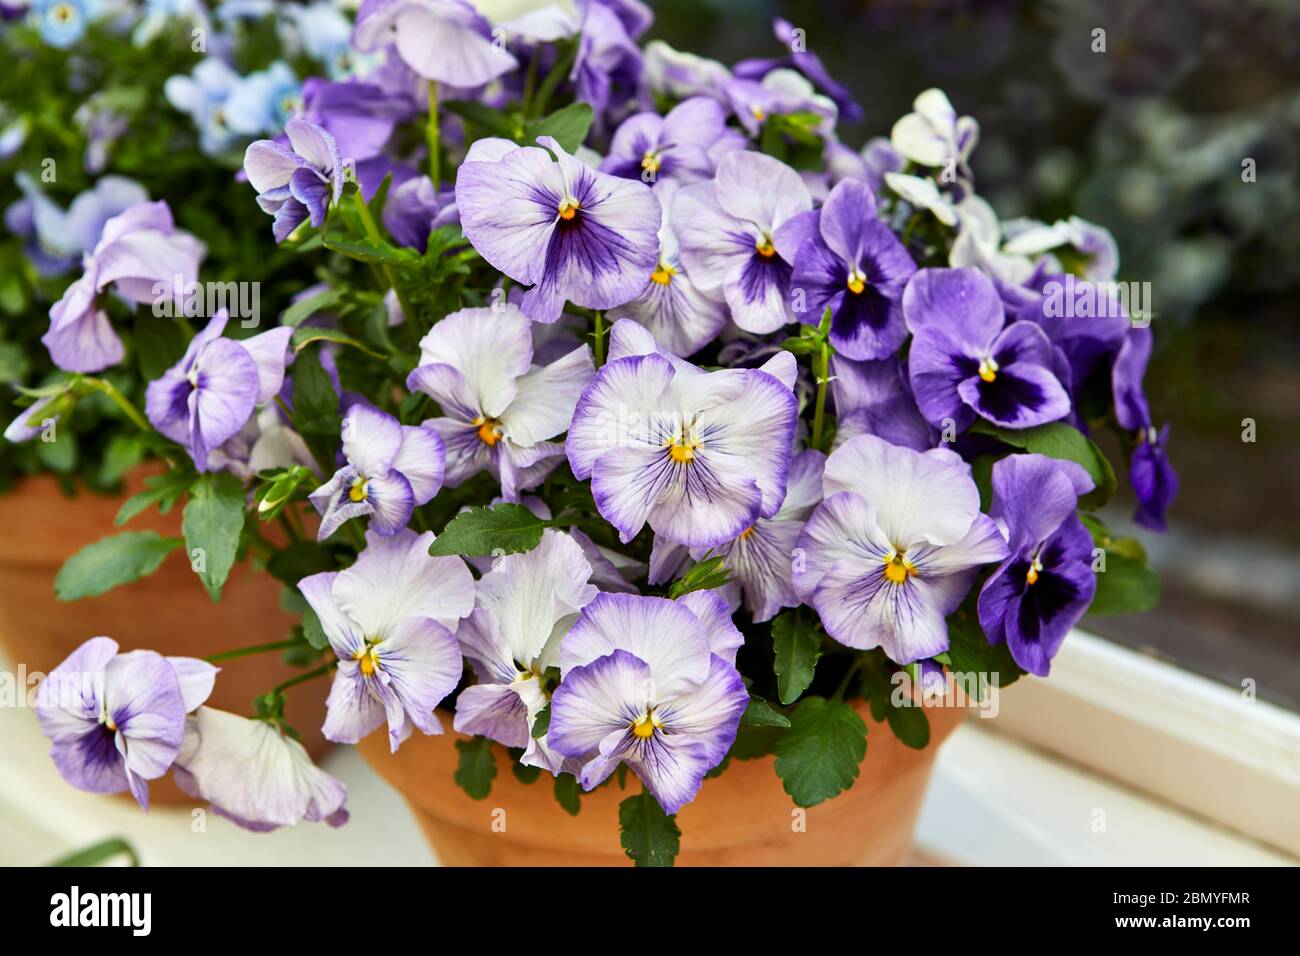 Colorful Pansy flowers in pots in front of a window. Stock Photo